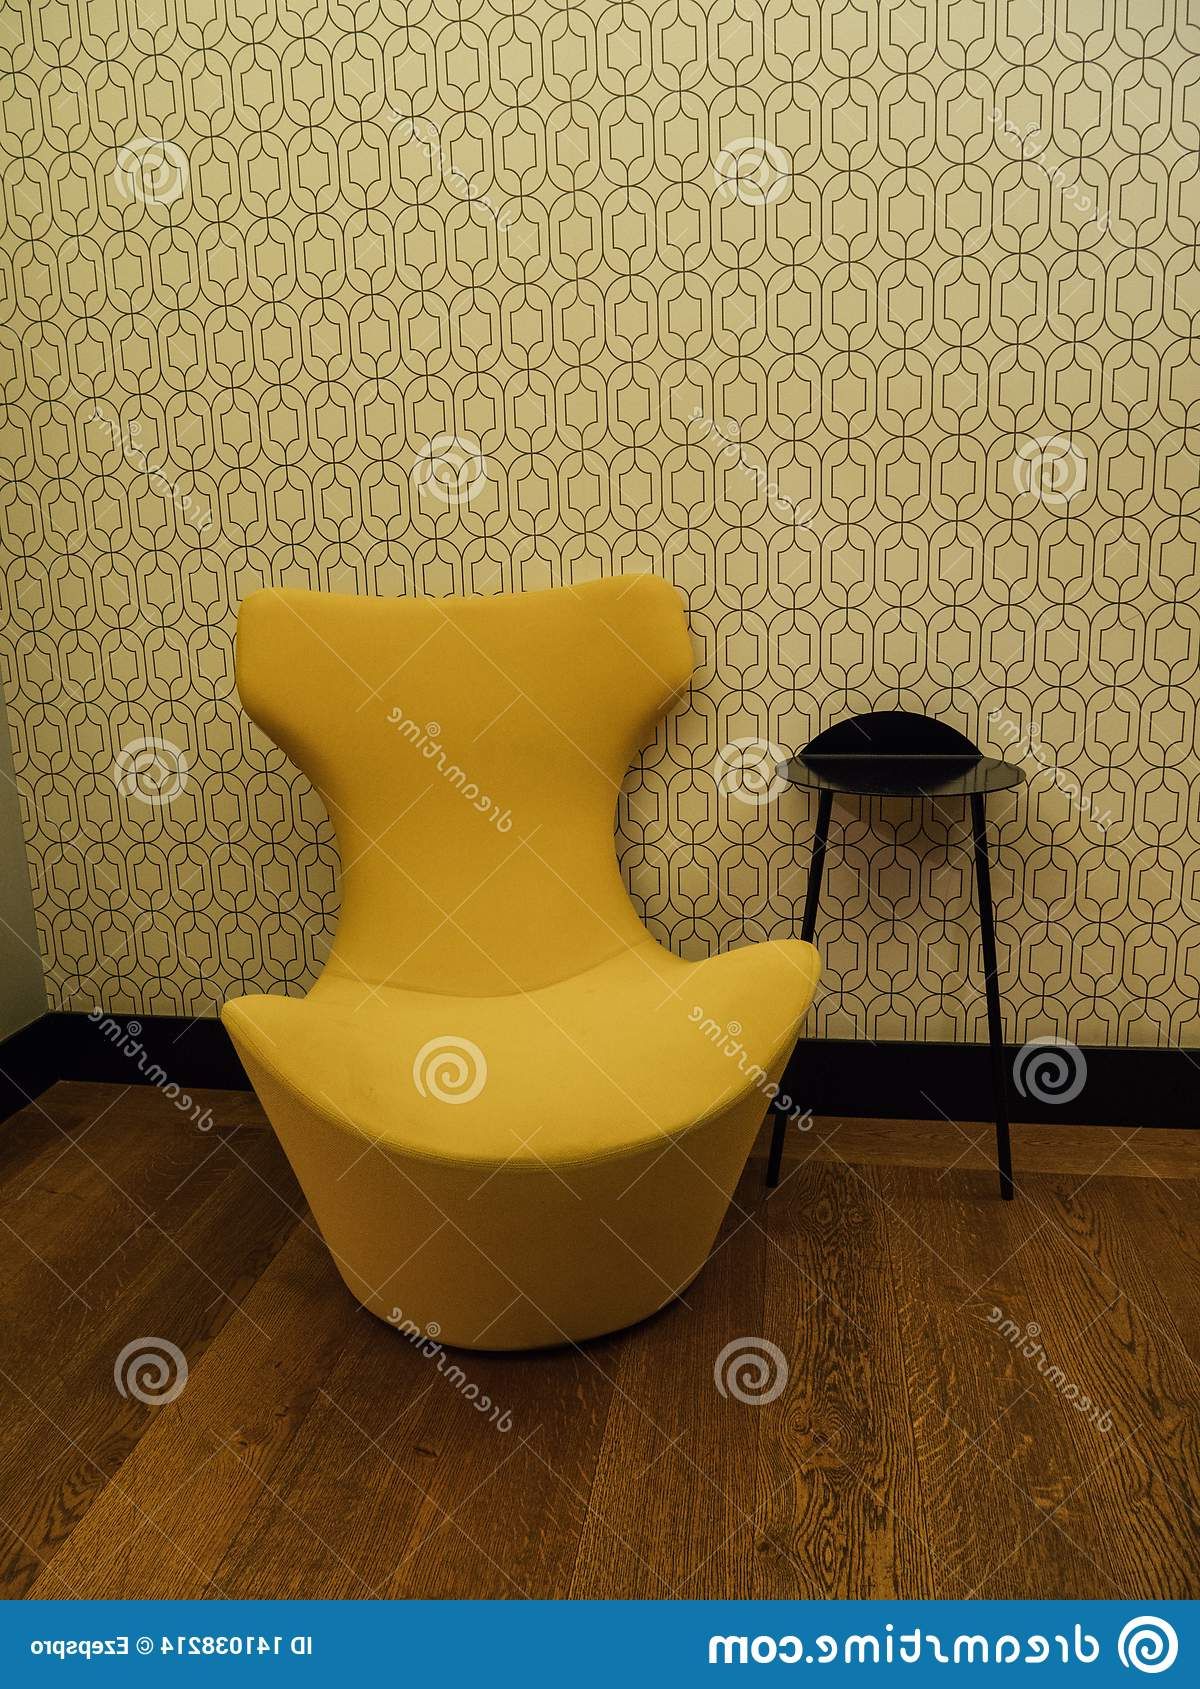 Popular Yellow And Black Coffee Tables In Yellow Design Sofa Next To Black Coffee Table Stock Photo (View 20 of 20)